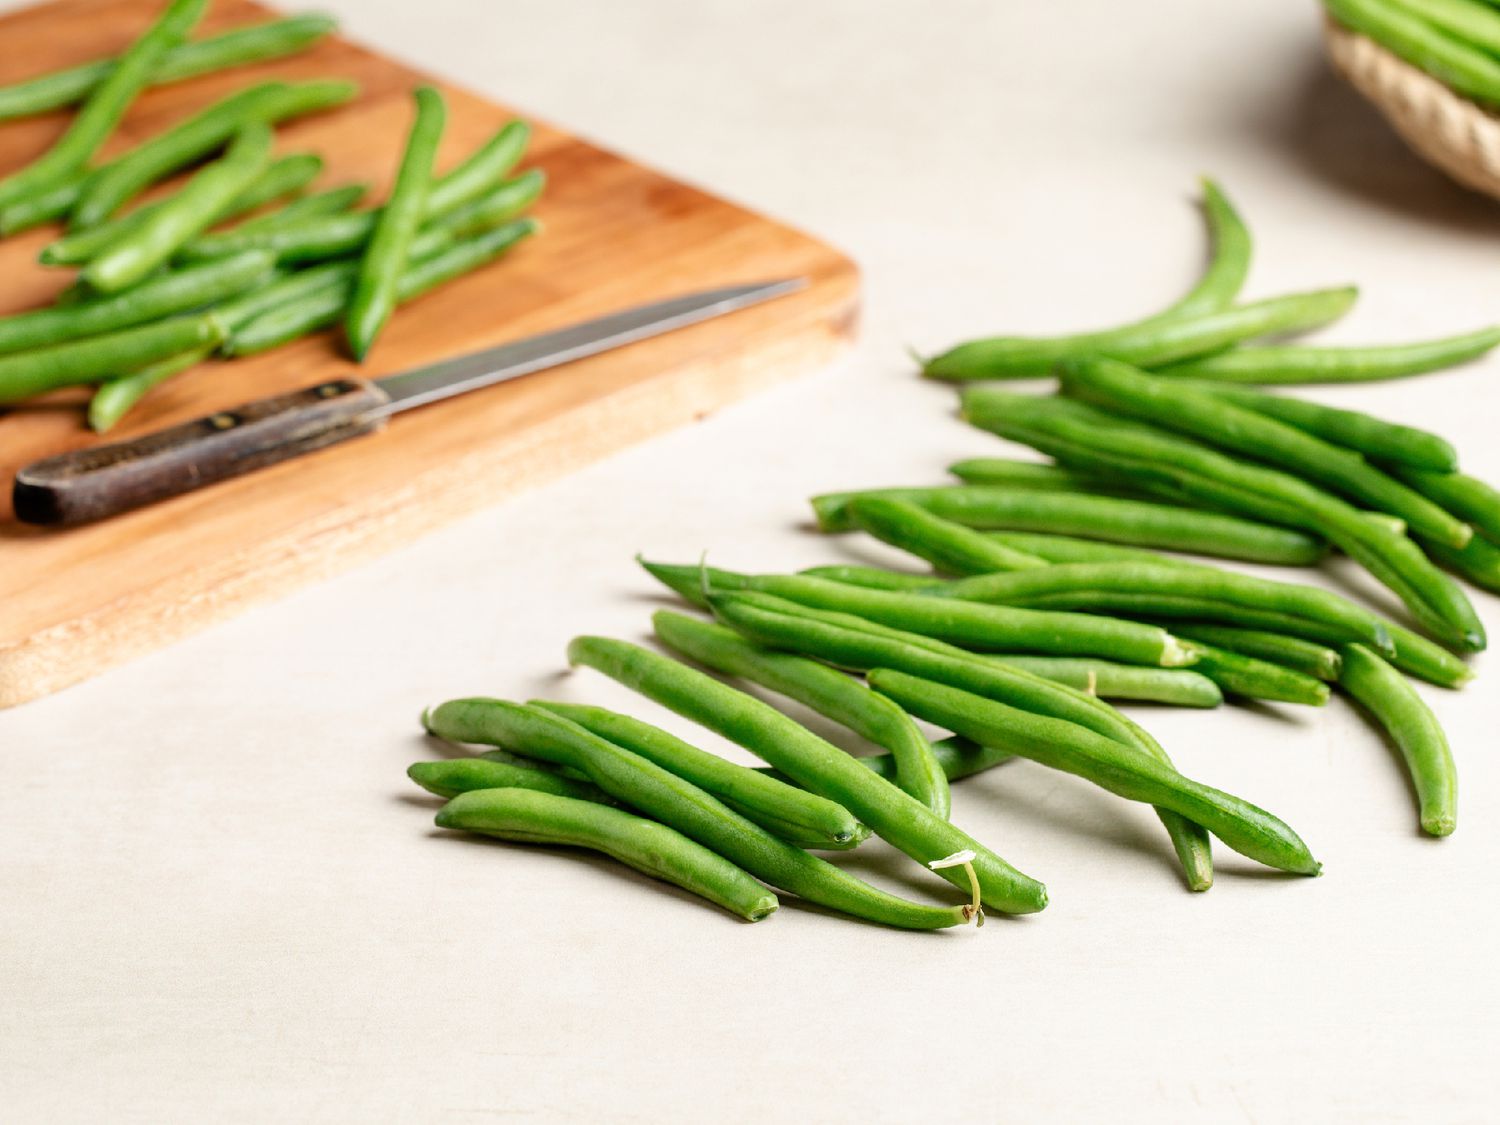 How To Store Pole Beans